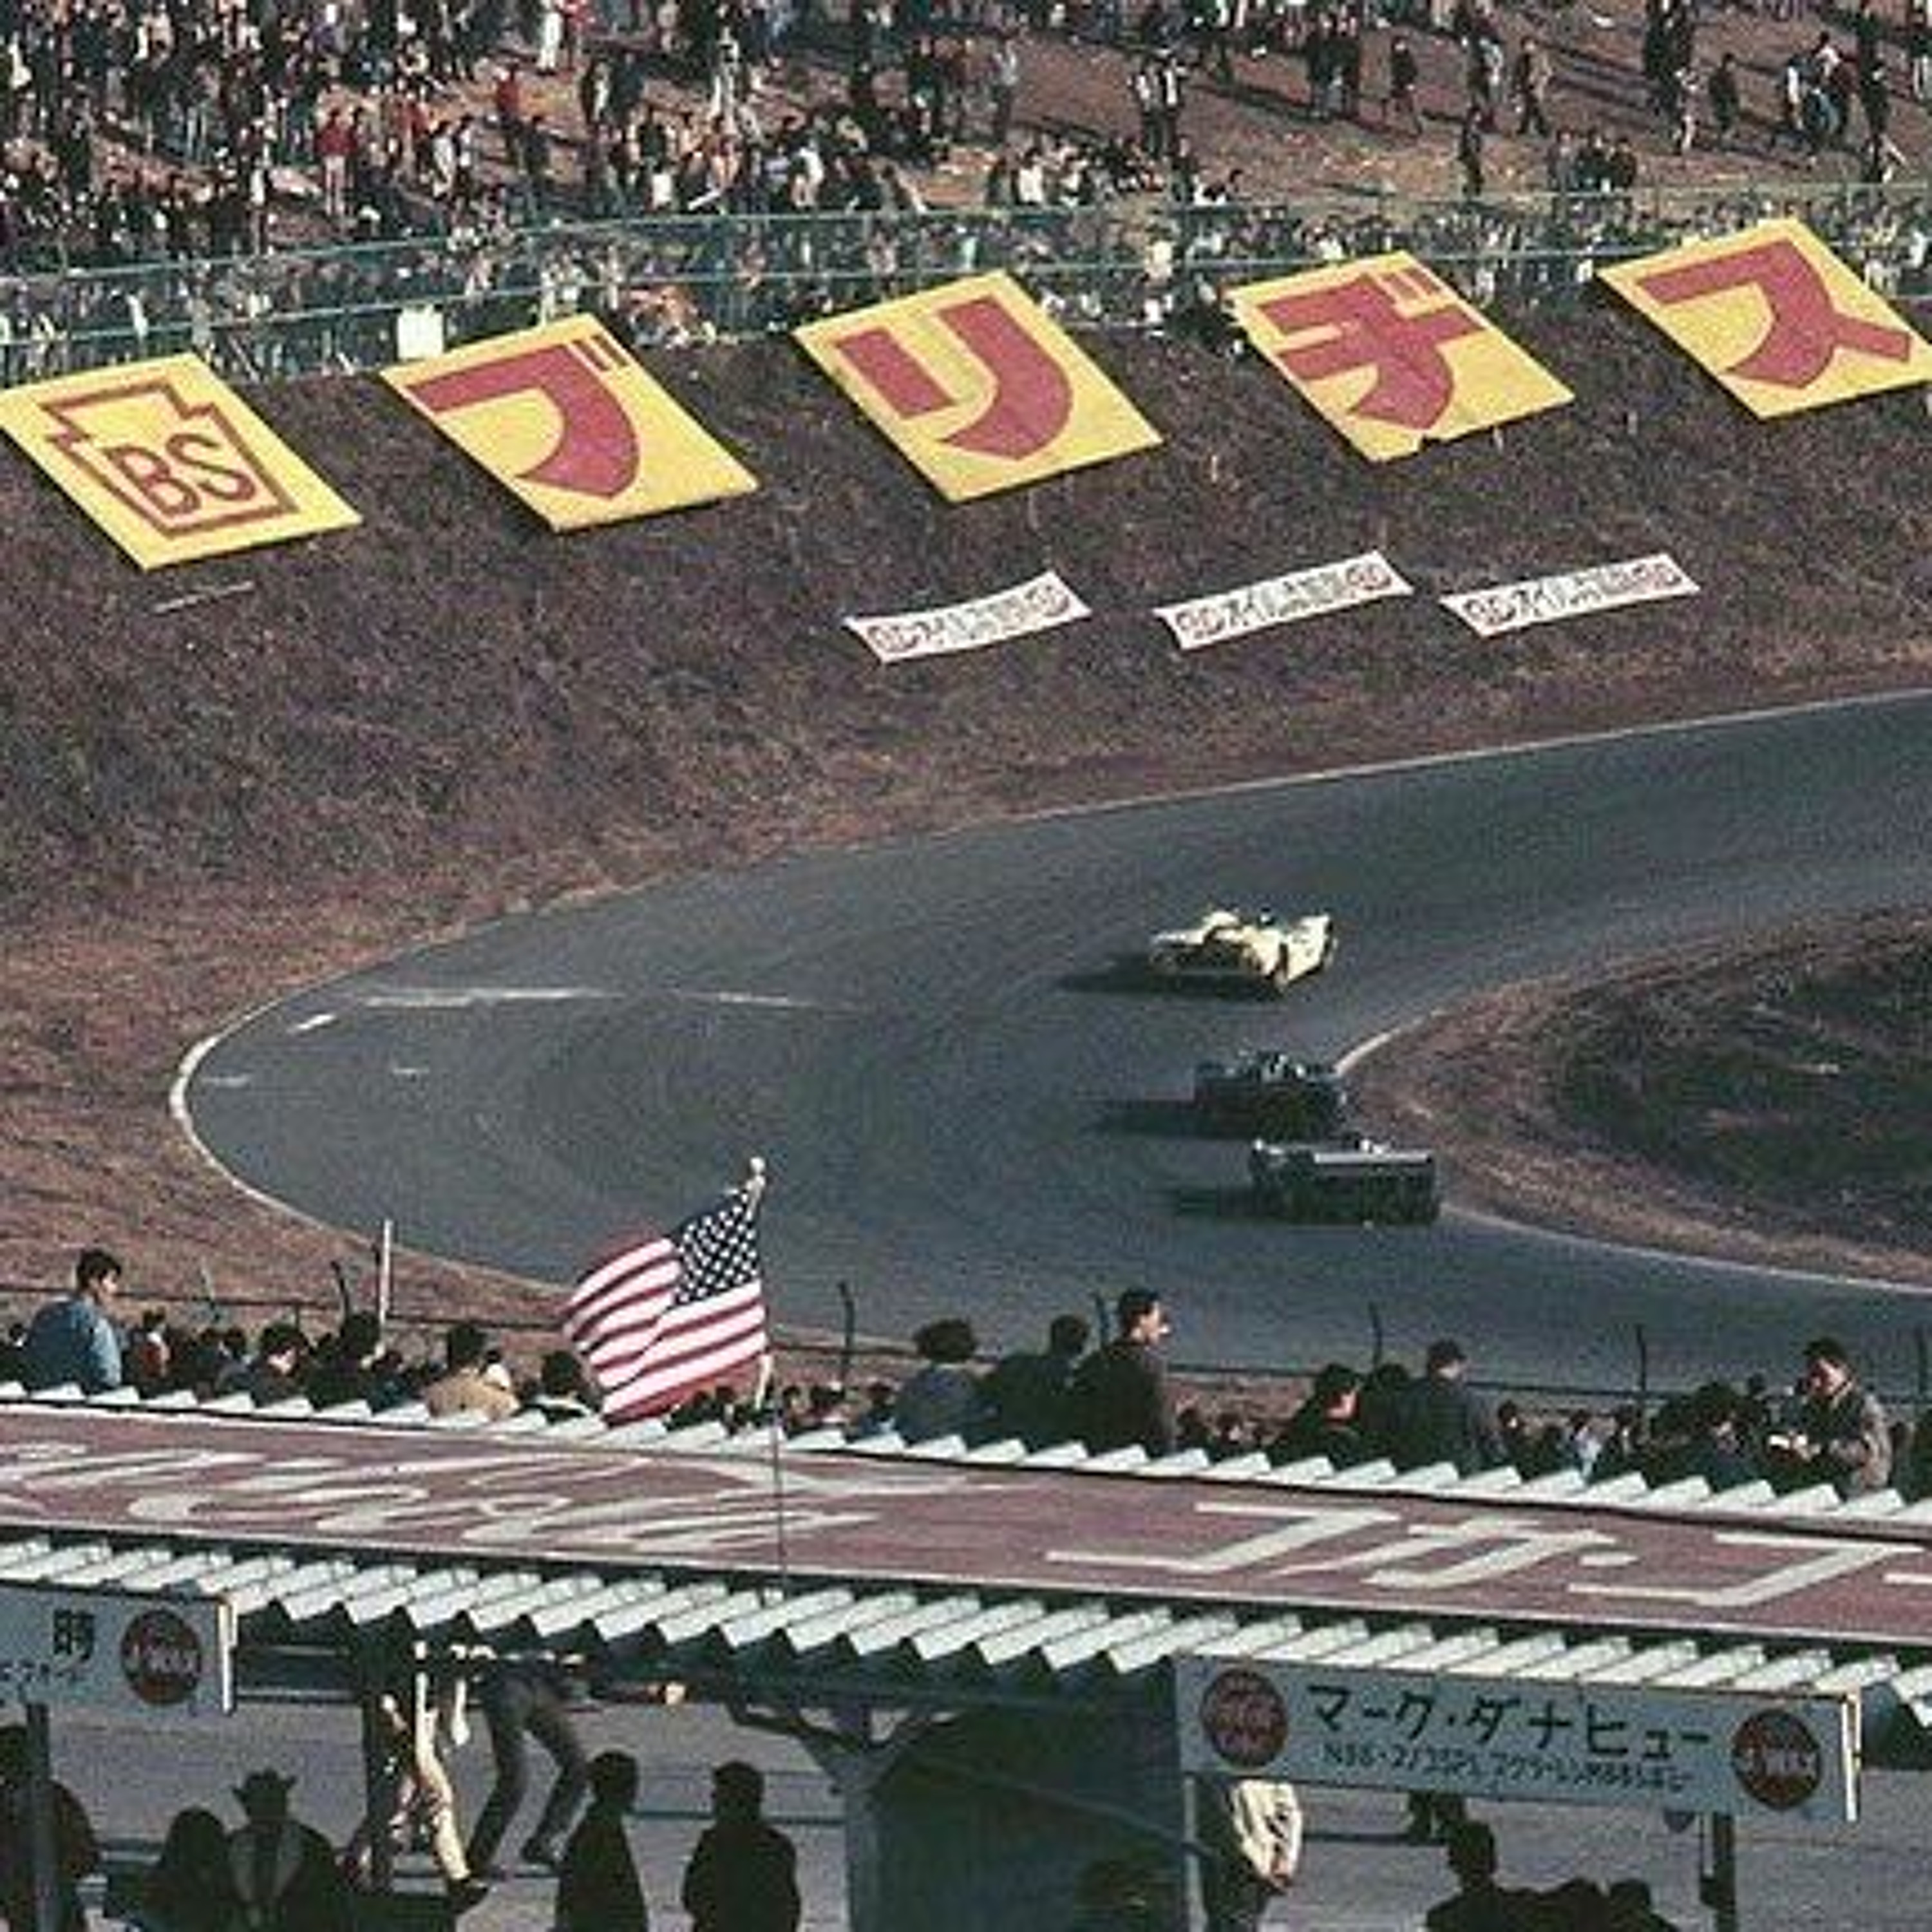 Episode #511: Well There's Your Caution - Fuji Speedway (WTYP Tribute)